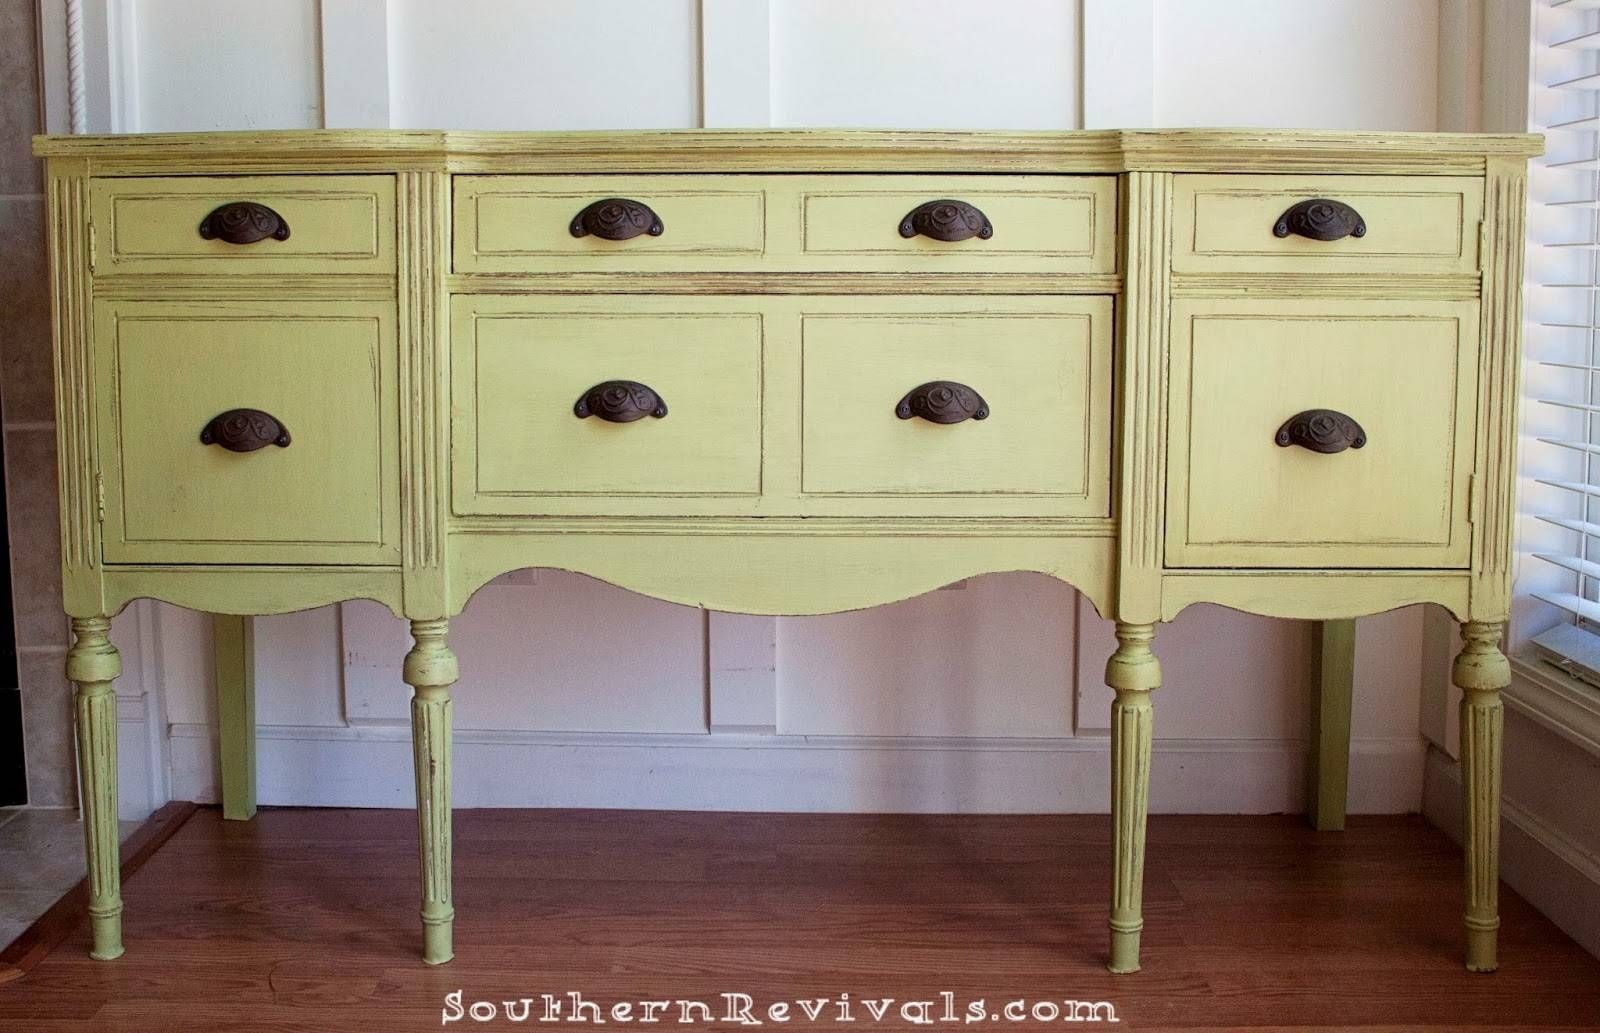 Updating A Vintage Sideboard Buffet With A Pop Of Color – Southern Throughout Current Vintage Sideboards And Buffets (View 6 of 15)